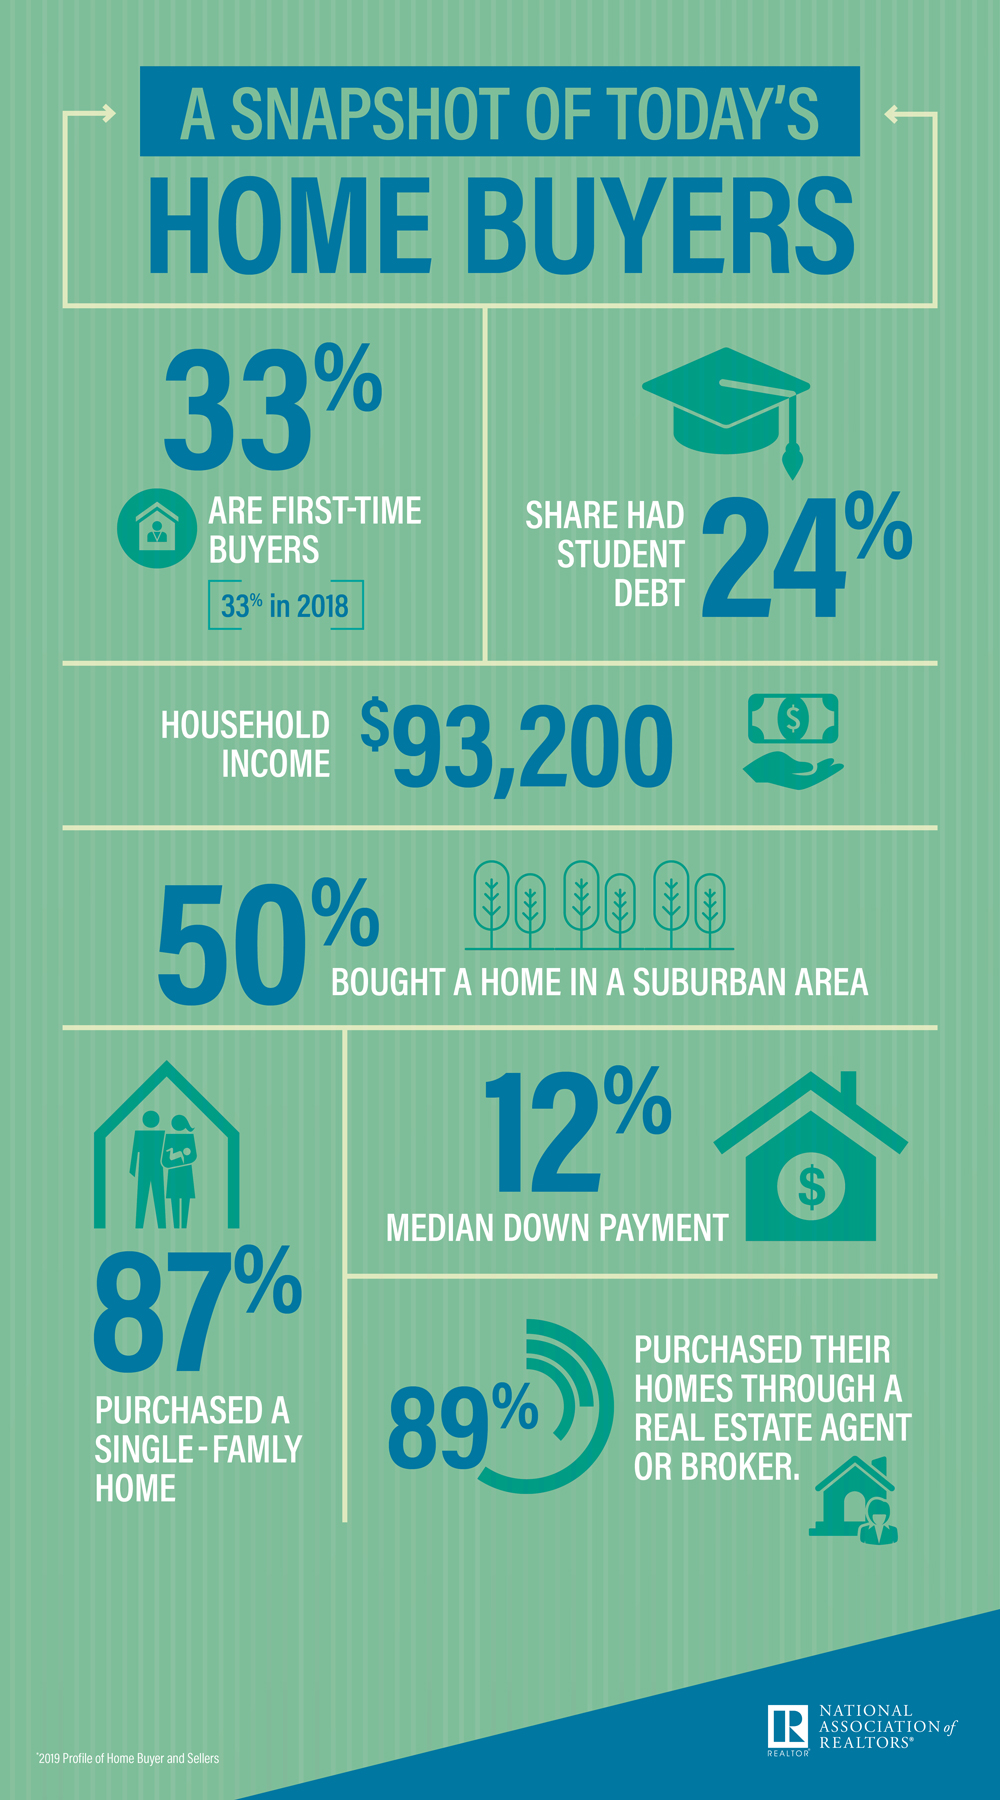 Highlights From the Profile of Home Buyers and Sellers